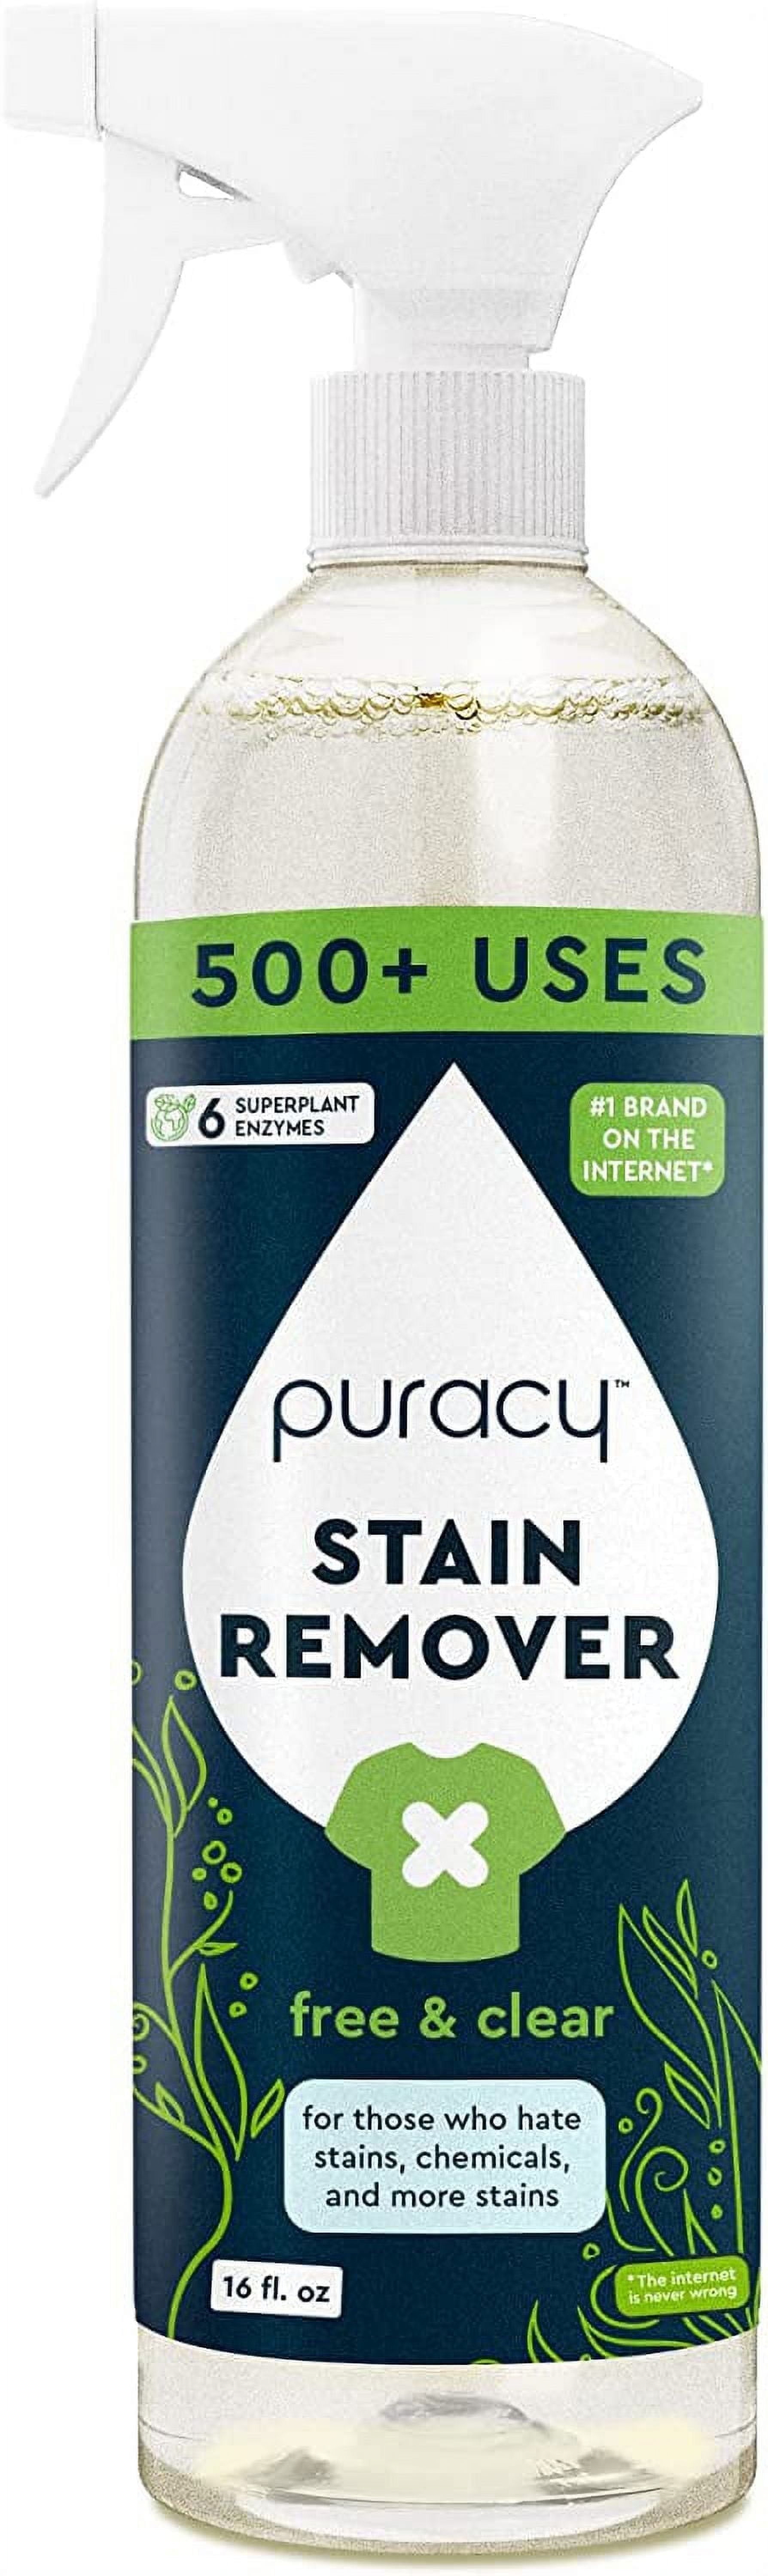 Puracy Pet Stain & Odor Remover